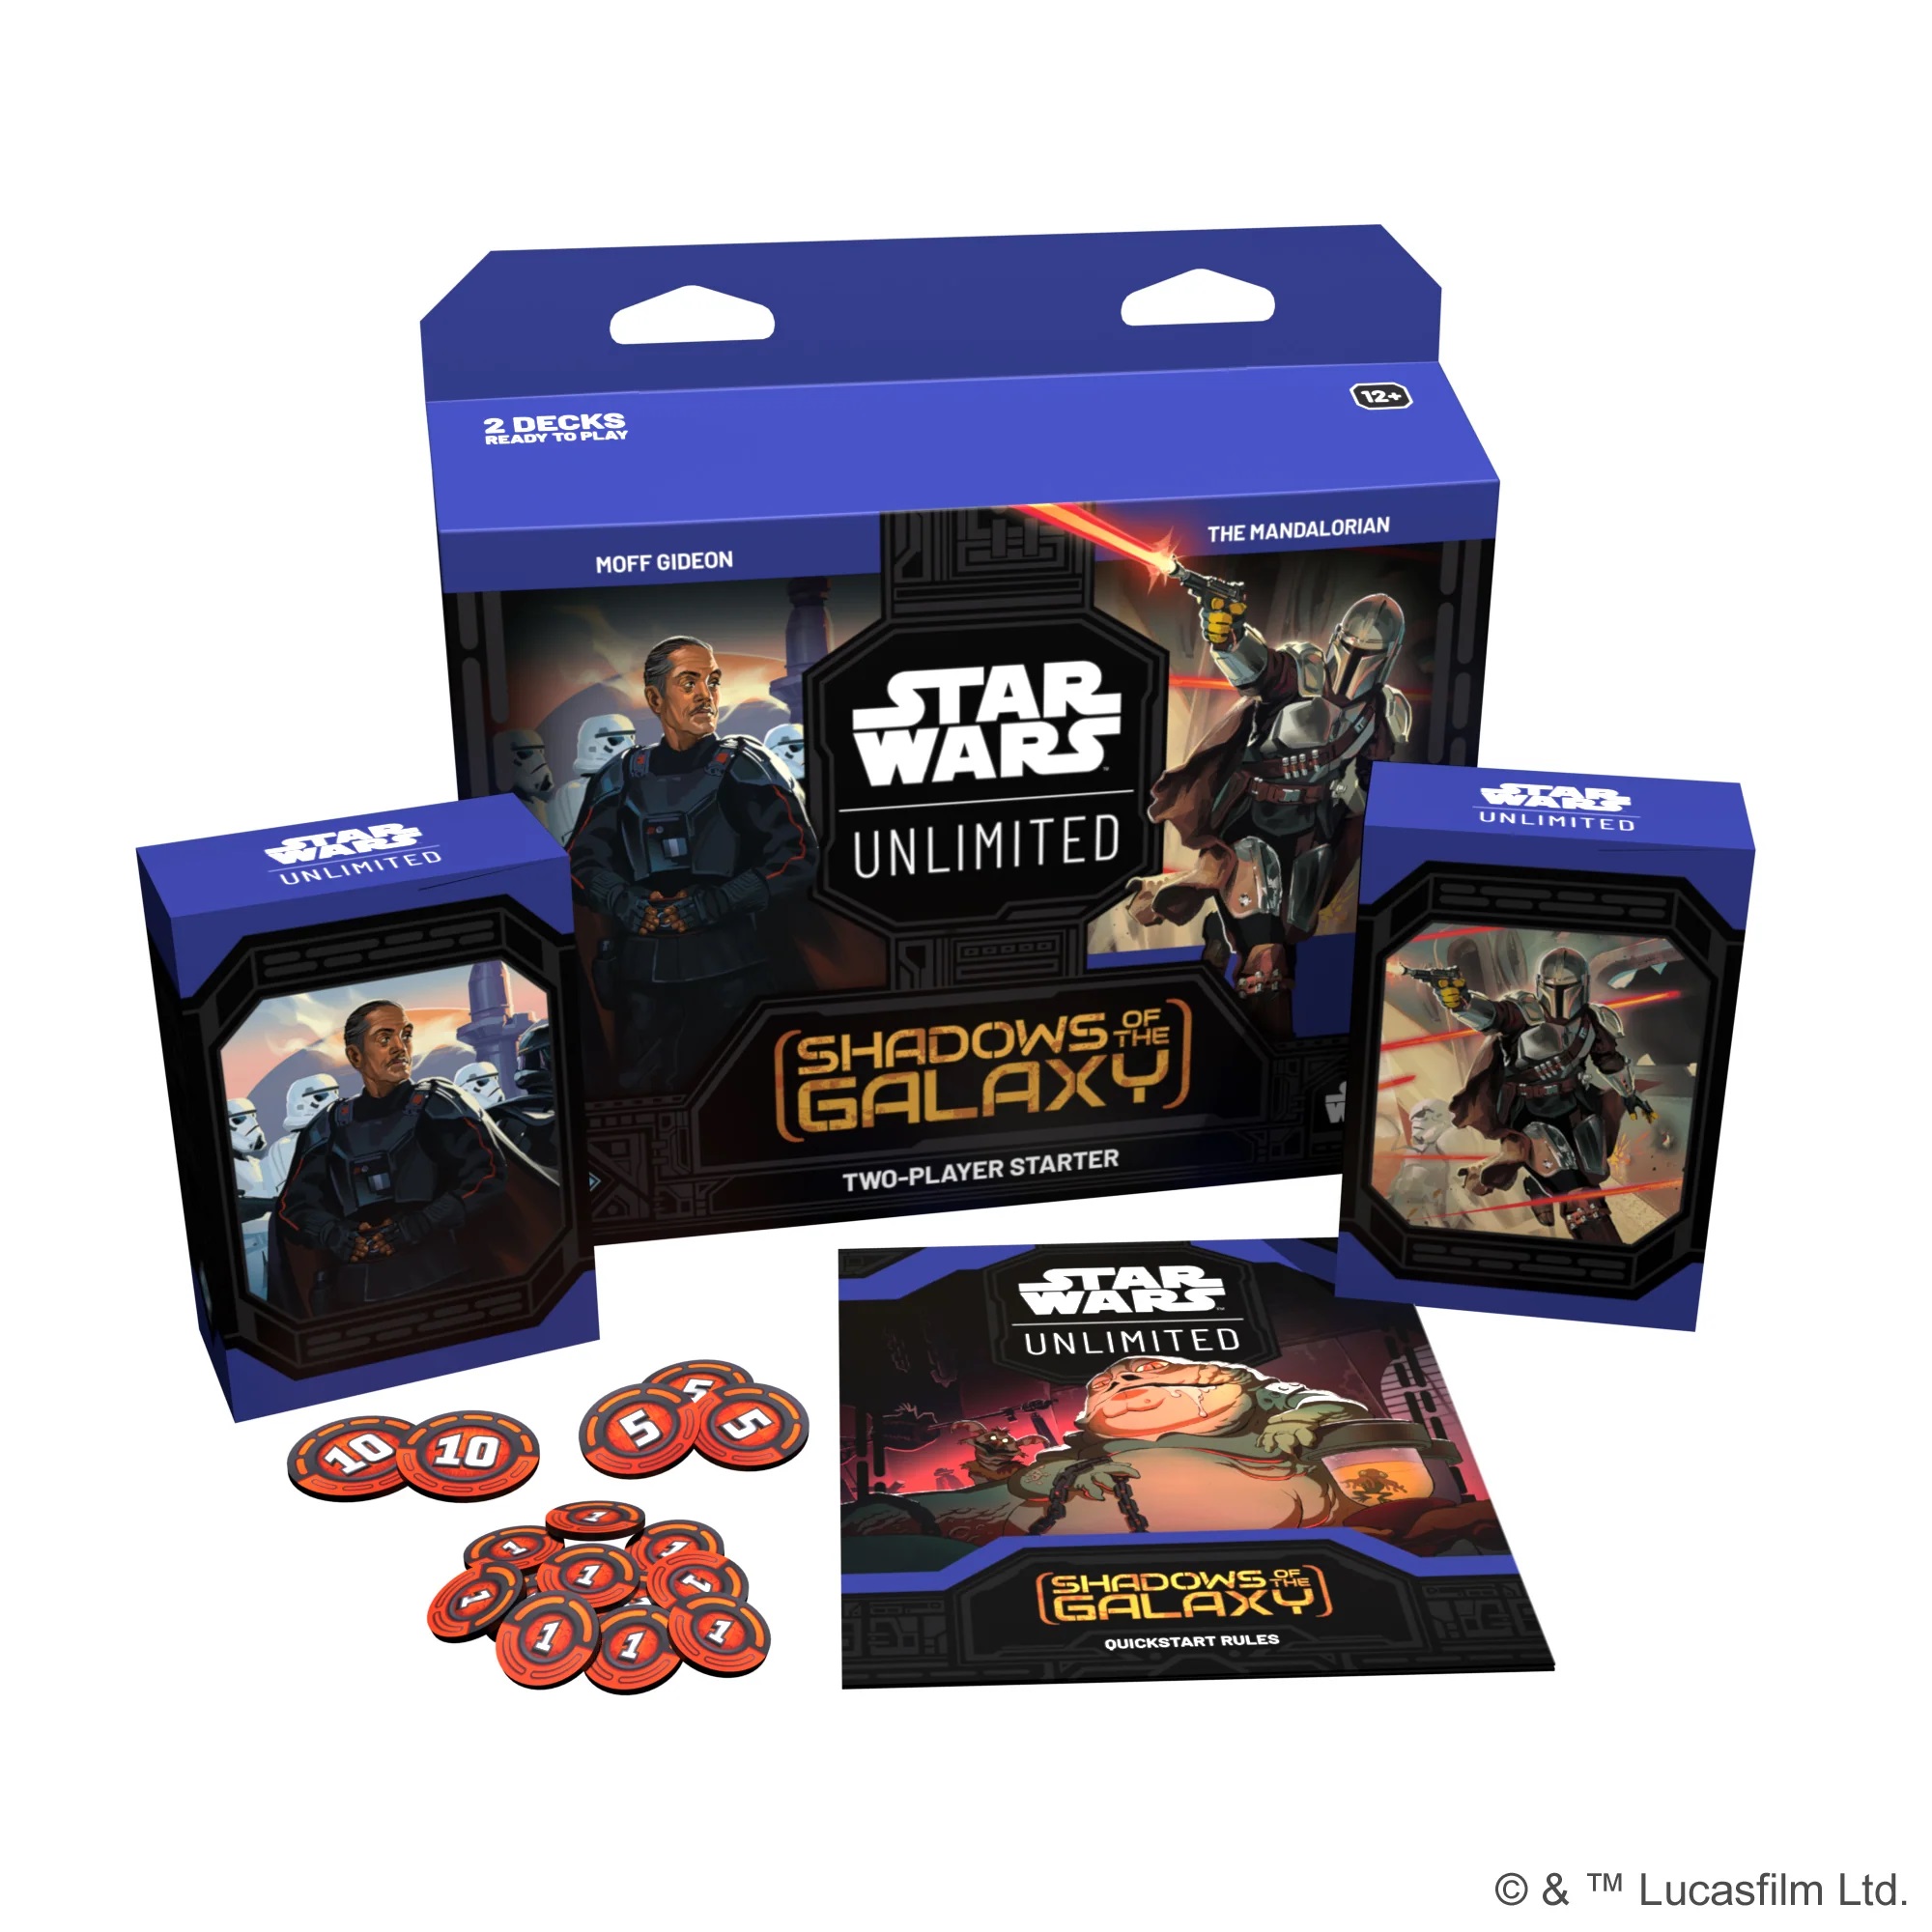 Star Wars Unlimited Tcg: Shadows of the Galaxy Two-Player Starter